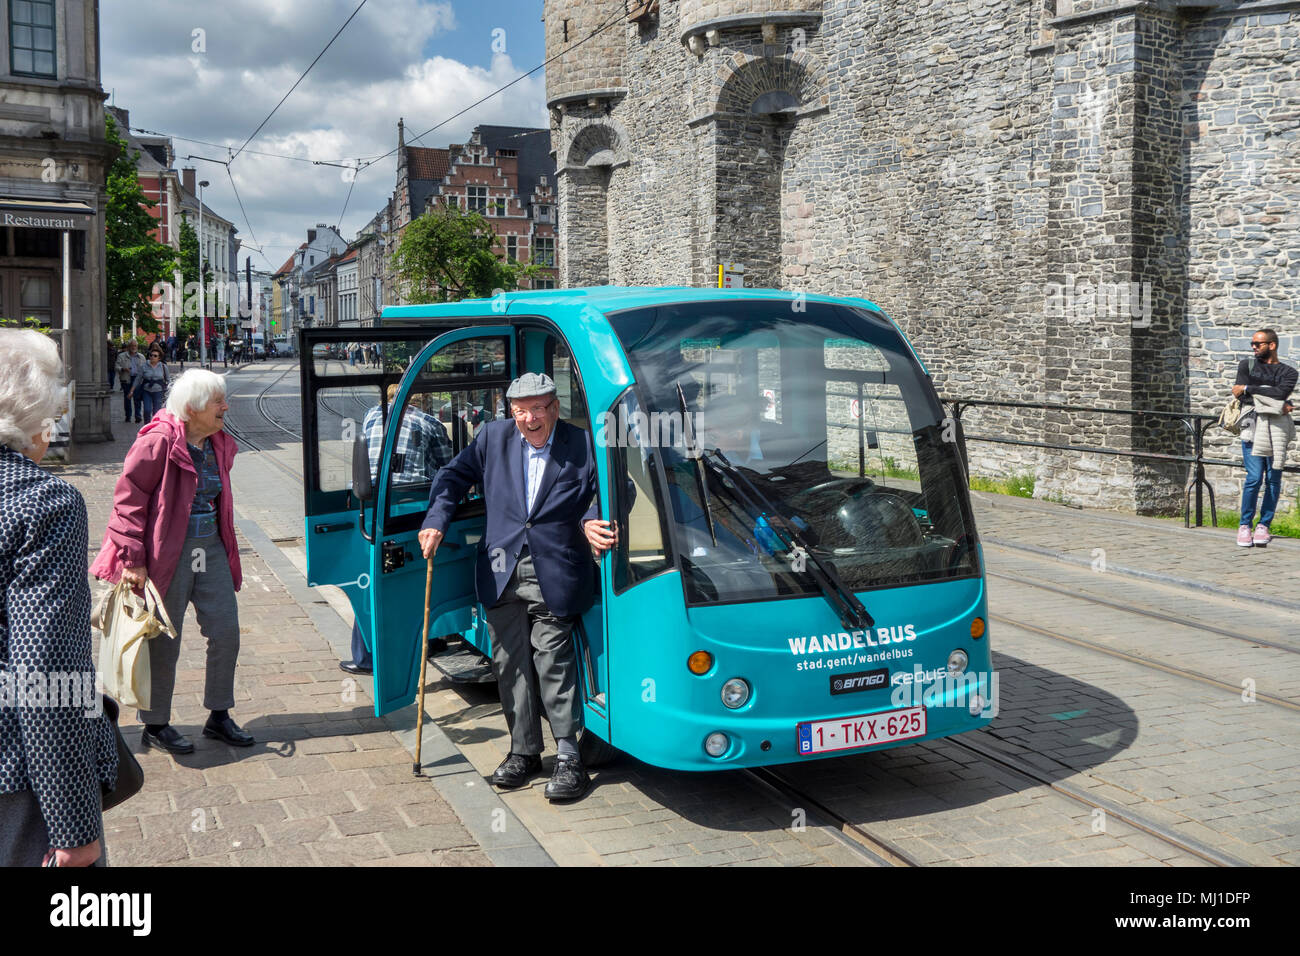 Elderly tourists stepping out of Keolis walking bus / Wandelbus, electric People Mover riding in the historic city centre of Ghent, Flanders, Belgium Stock Photo